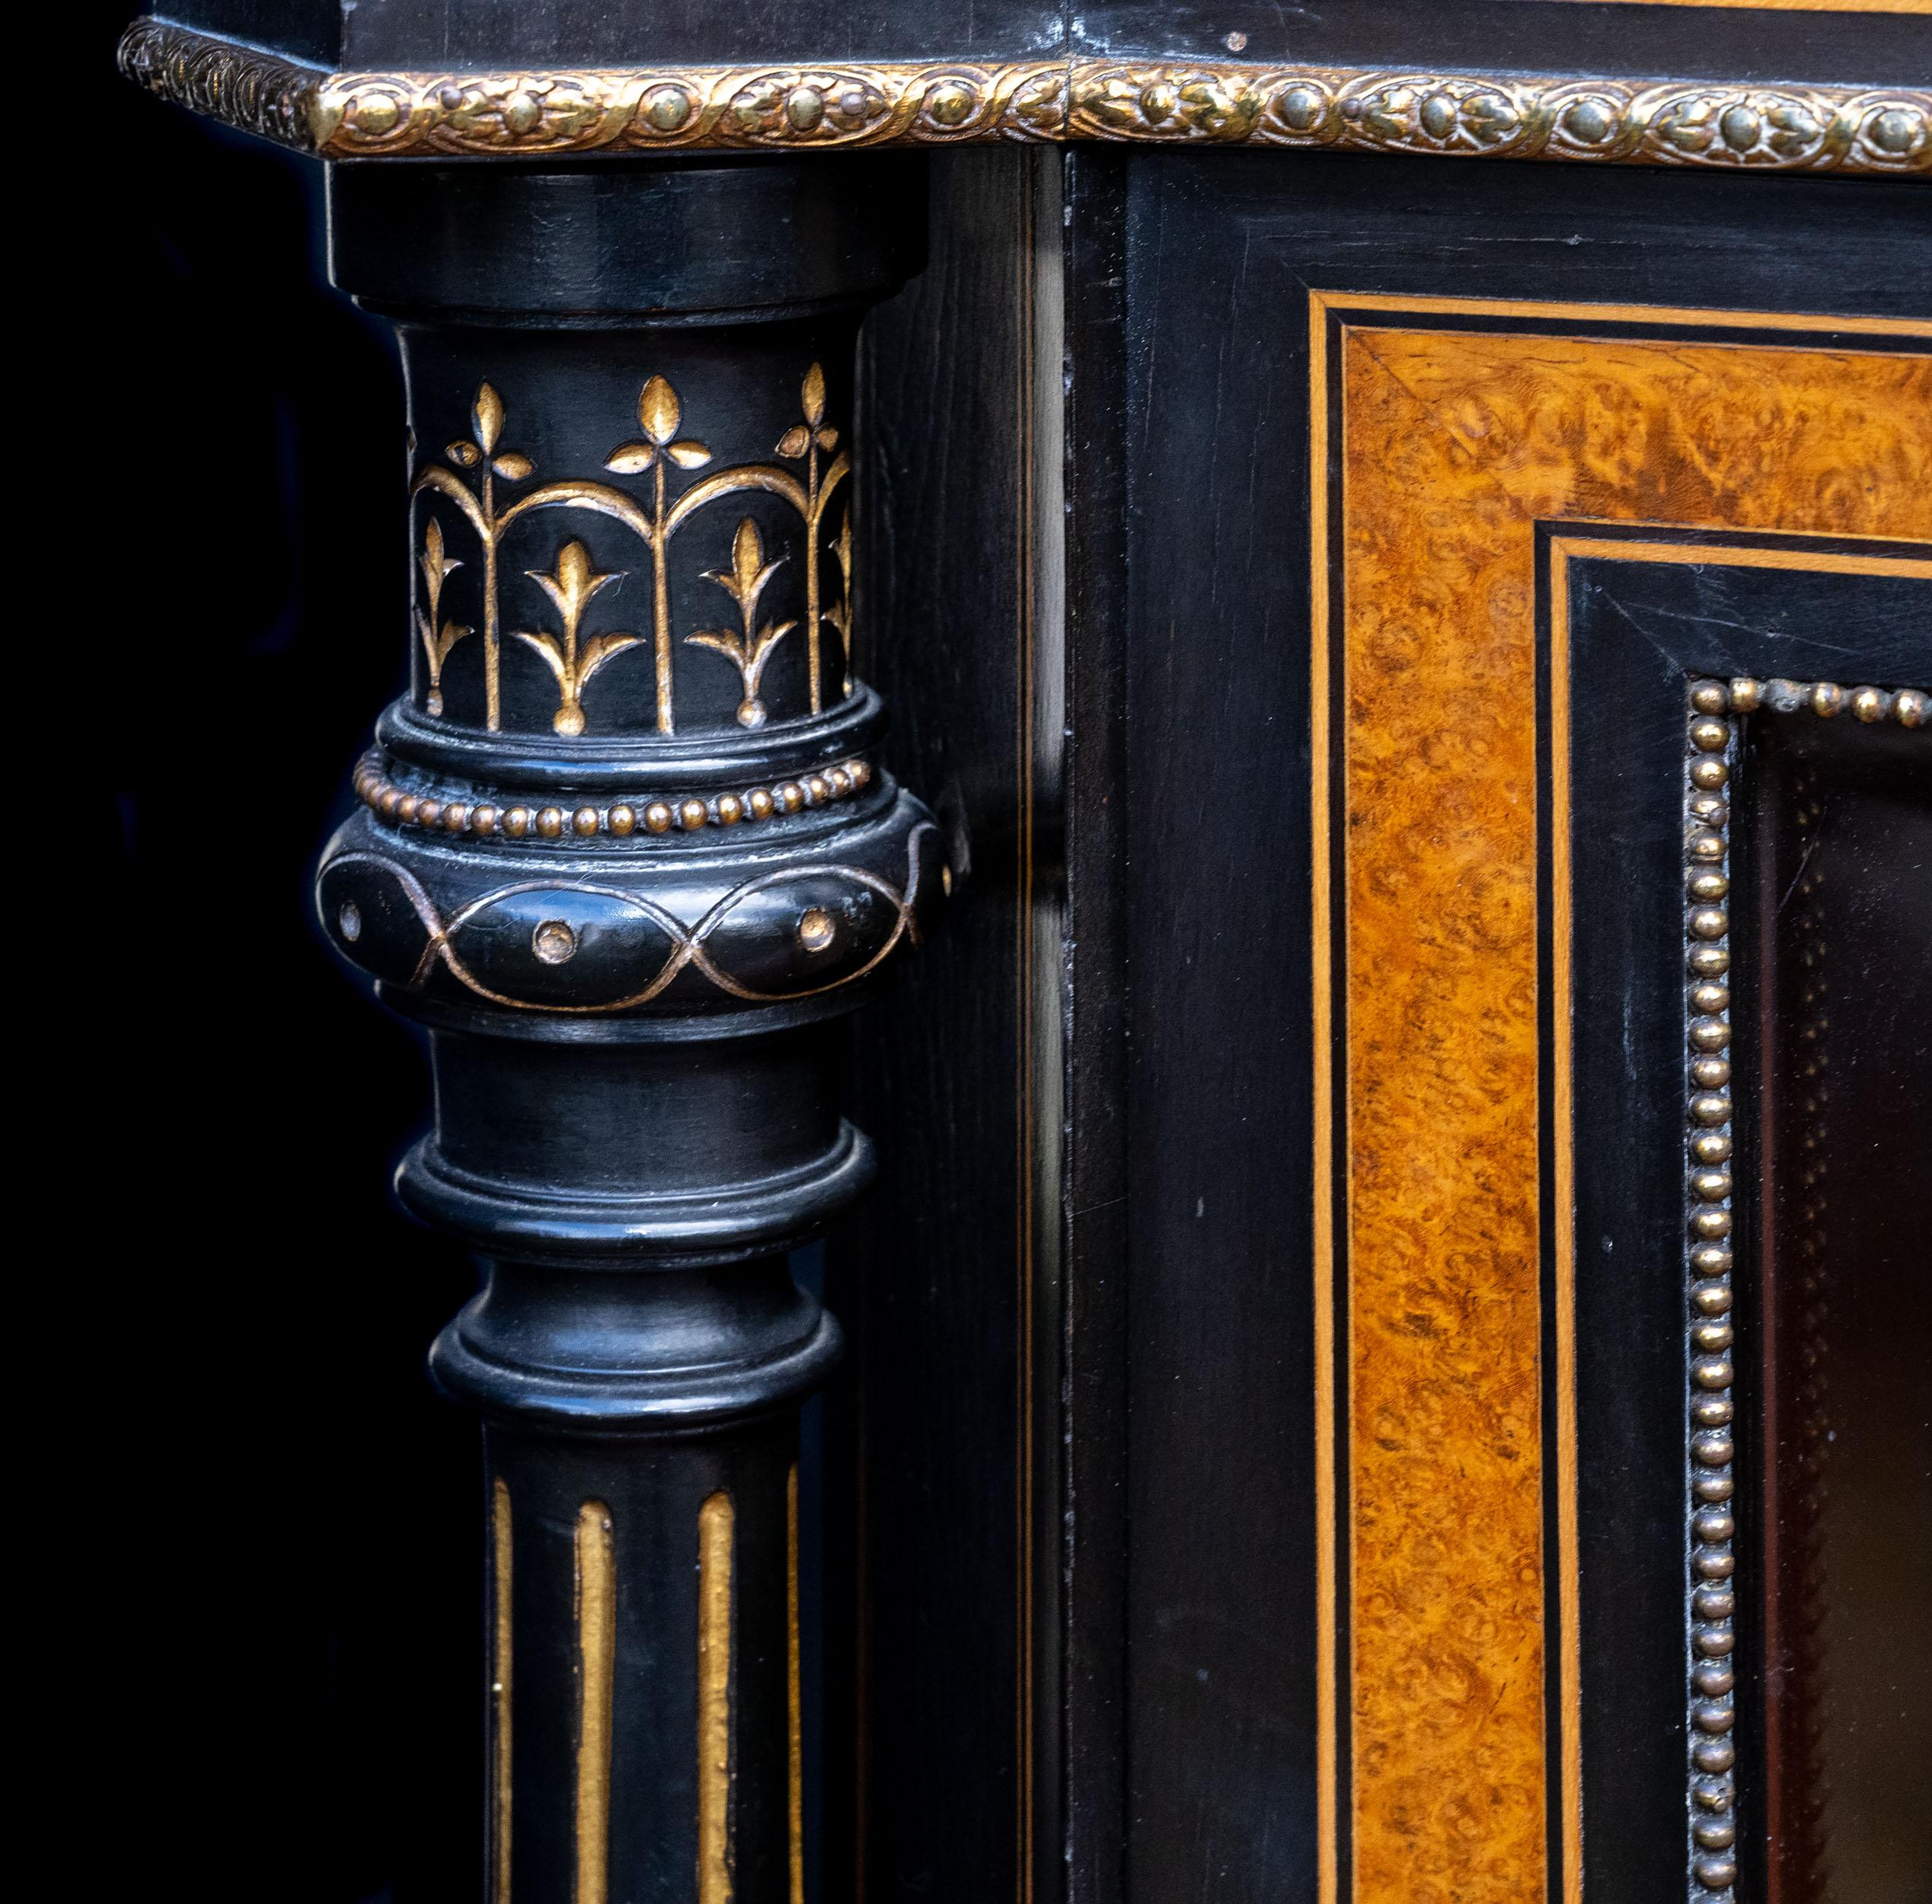 A very fine three door Victorian, ebonized, ormolu and inlaid Credenza. The three doors, two of which are glazed are separated by turned, carved, gilded and ebonised columns, supporting a delicately inlaid frieze with ormolu detail. The central door